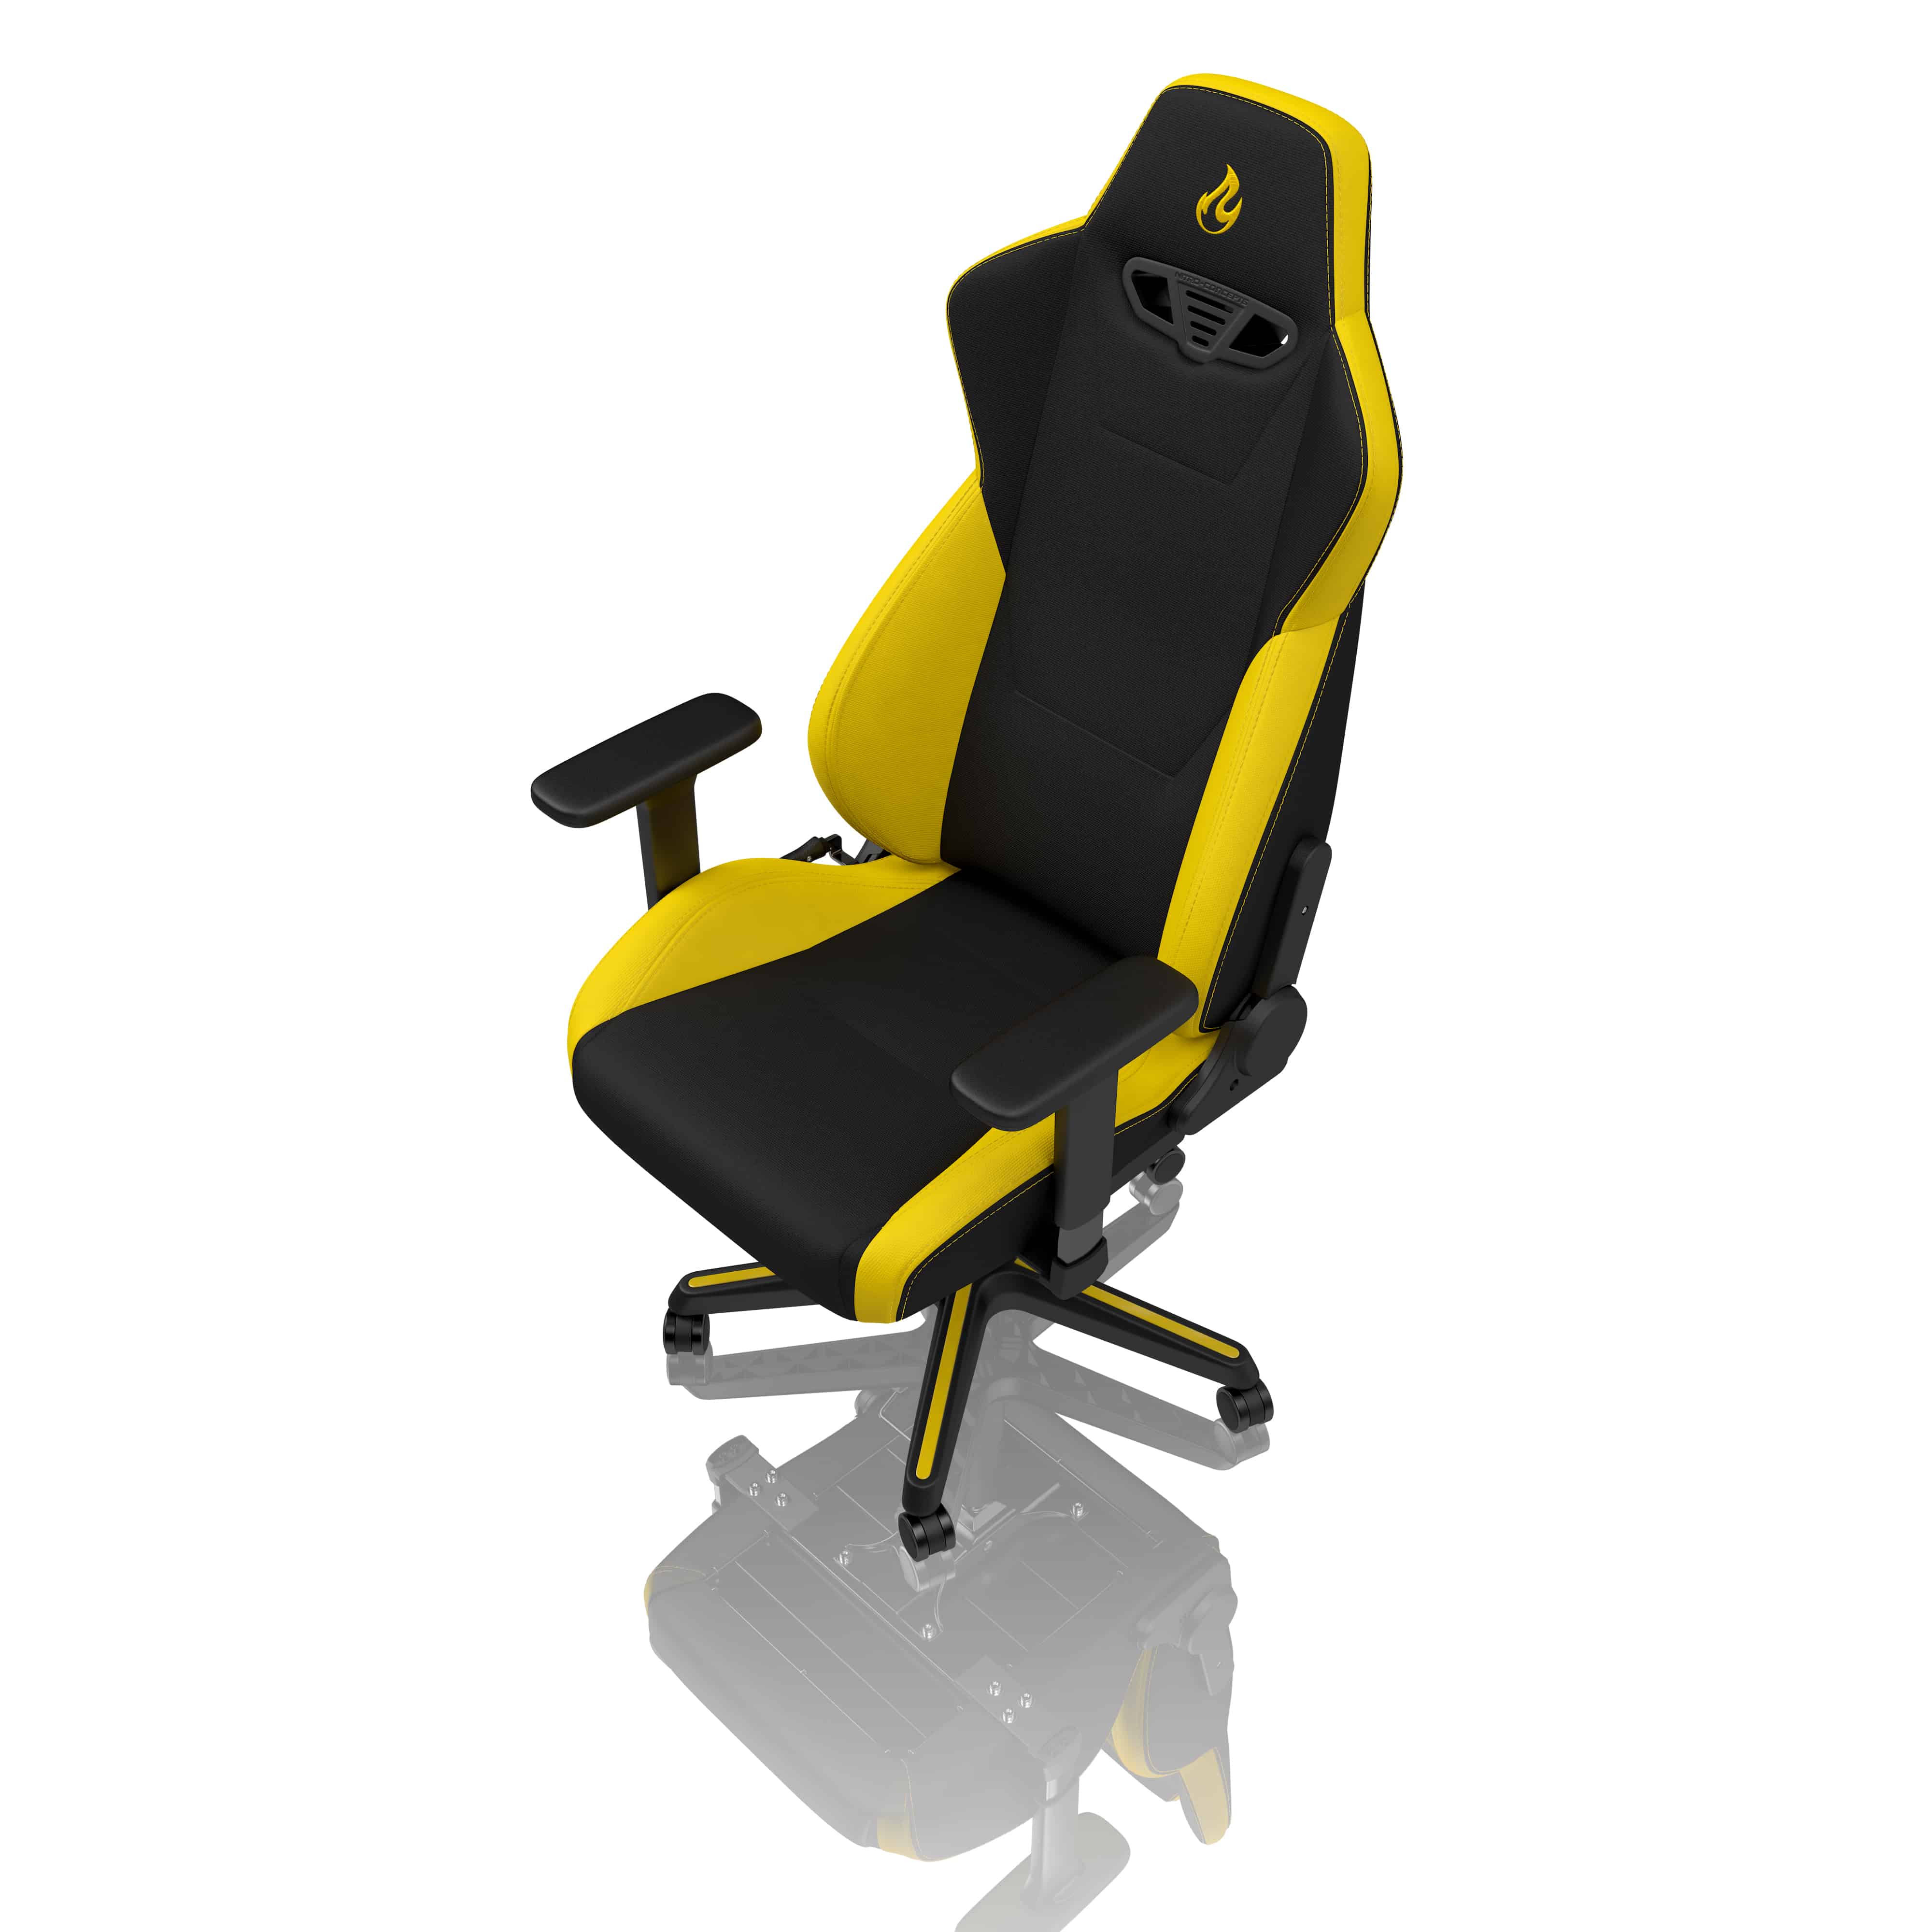 Nitro Concepts S300 Series Gaming Chair Black/Yellow